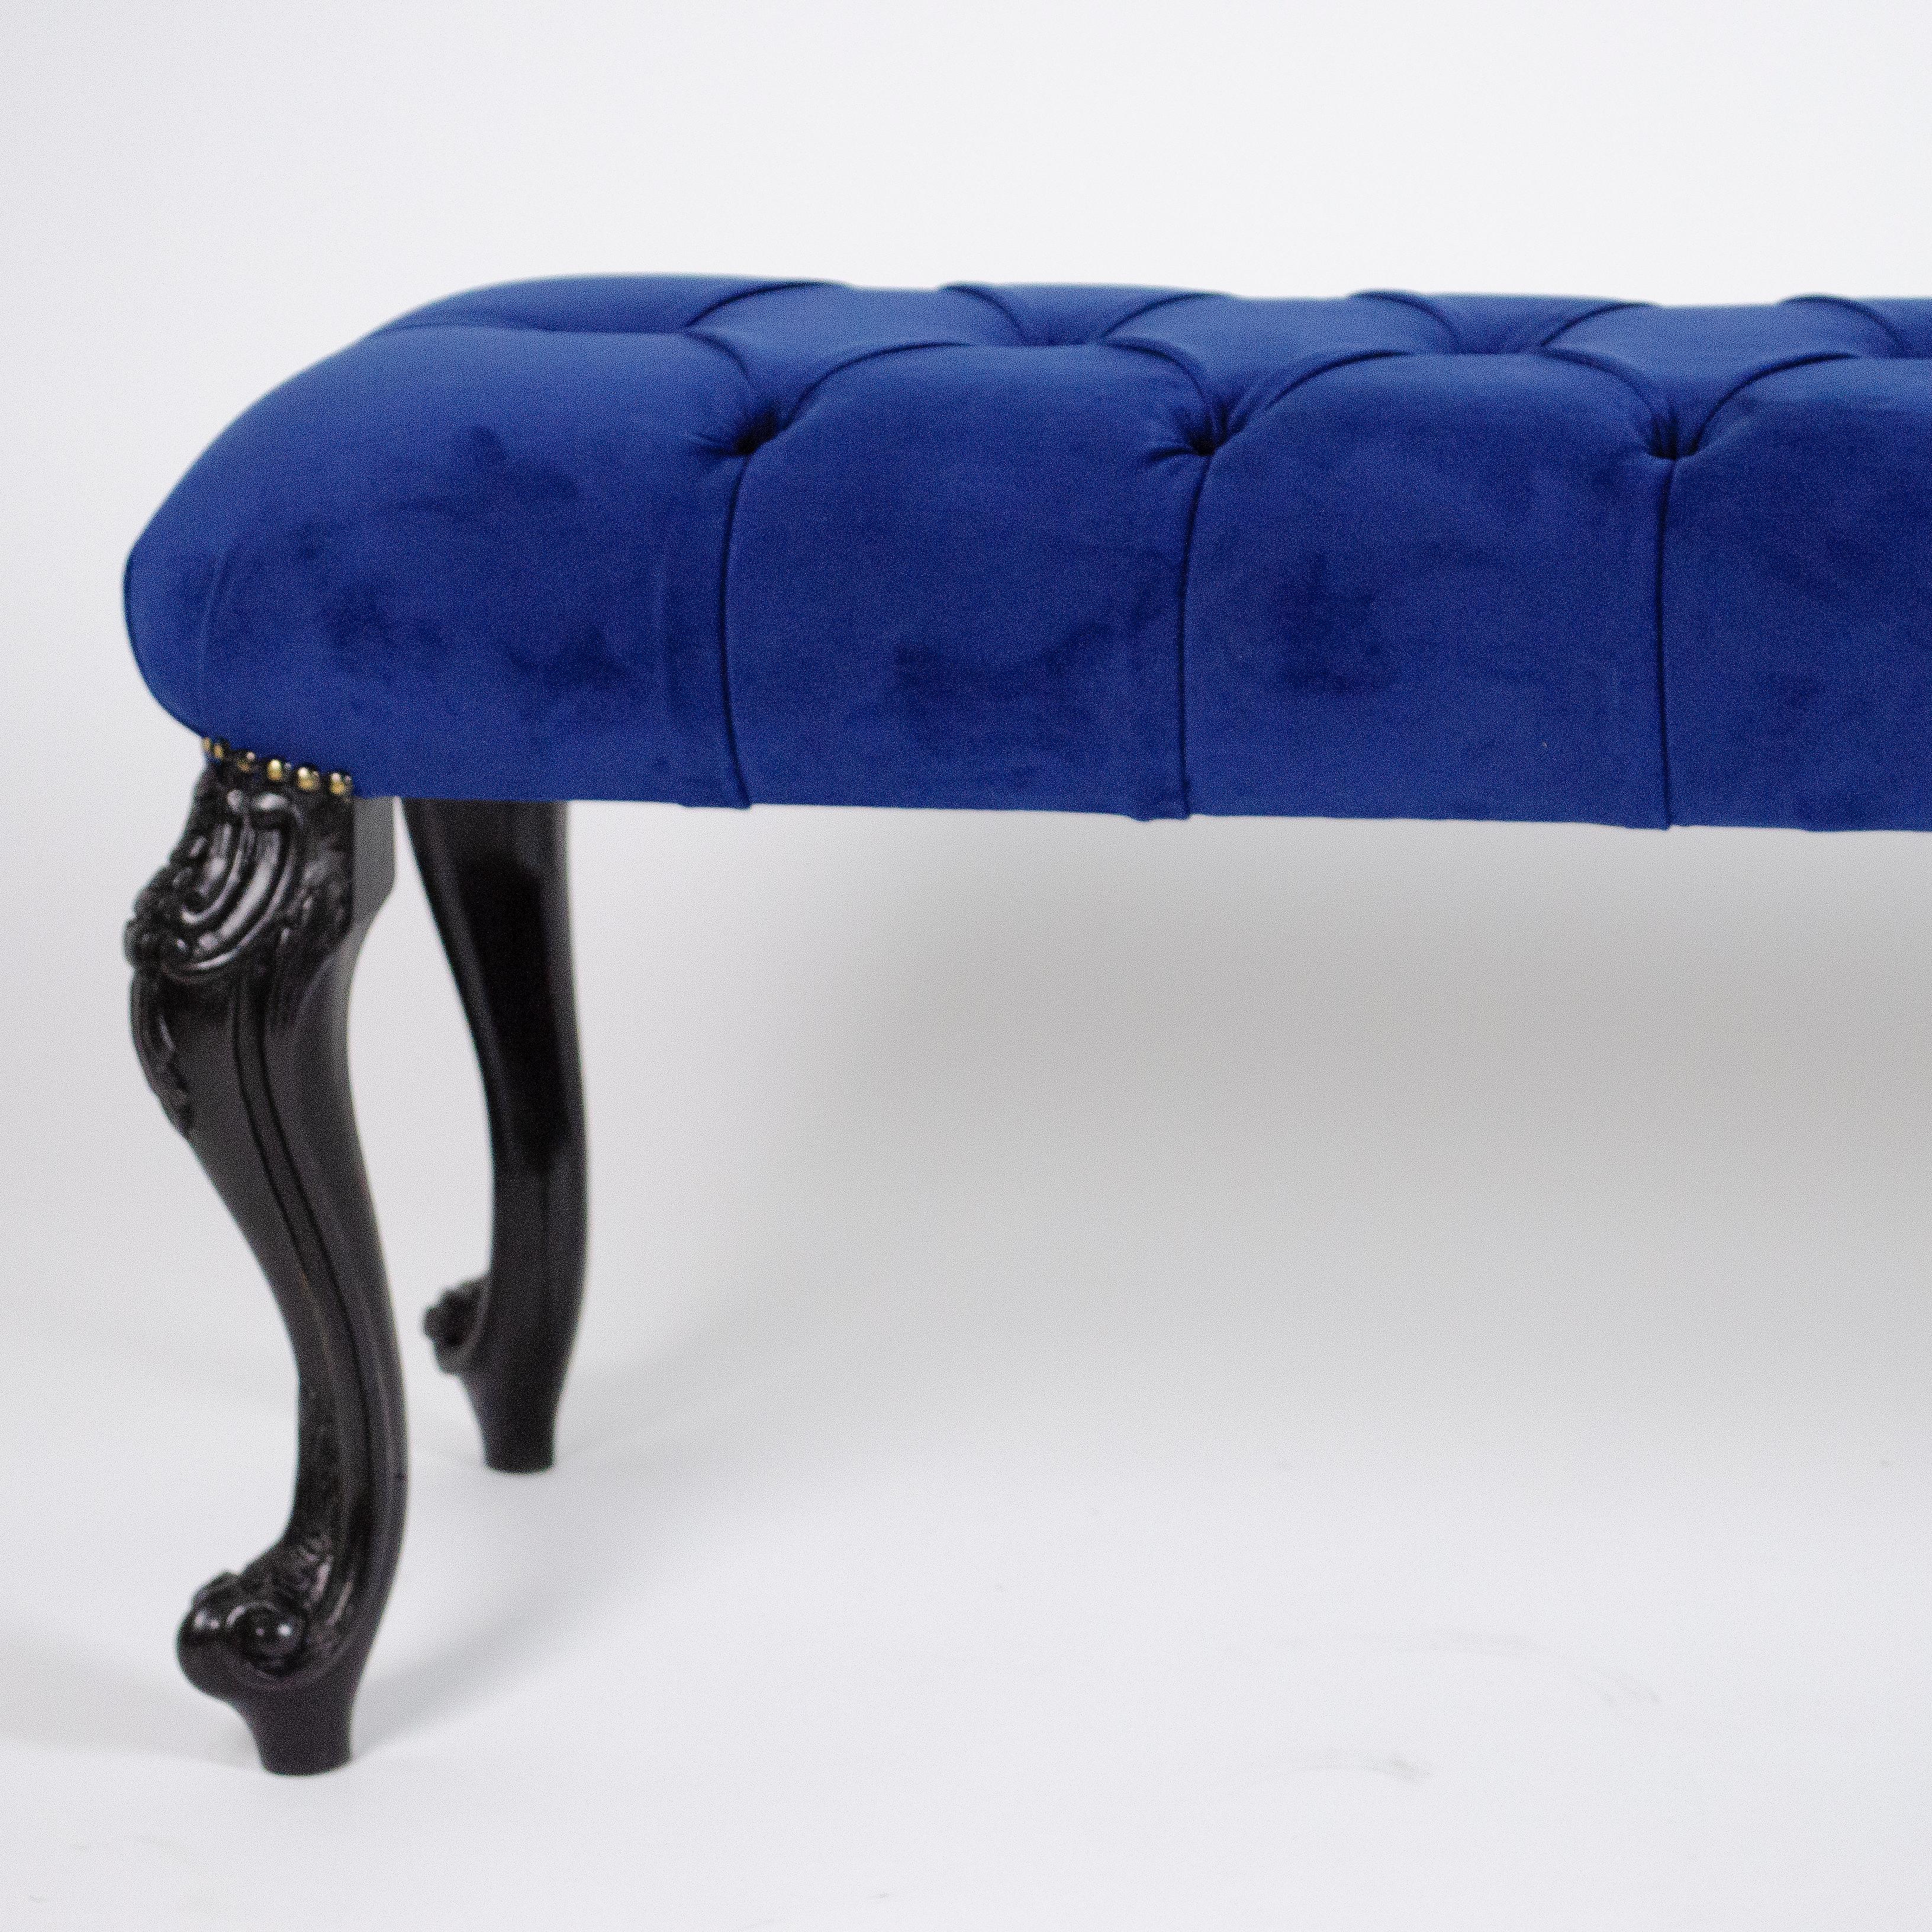 Blue electric velvet reupholstered bench with black ebonized and engraved legs. 
Size: L 140 cm, D 45 cm, H 49 cm
How to set in a room: this kind of bench is perfect at the end of a bed, along a corridor, in an entrance, to complete seats in a